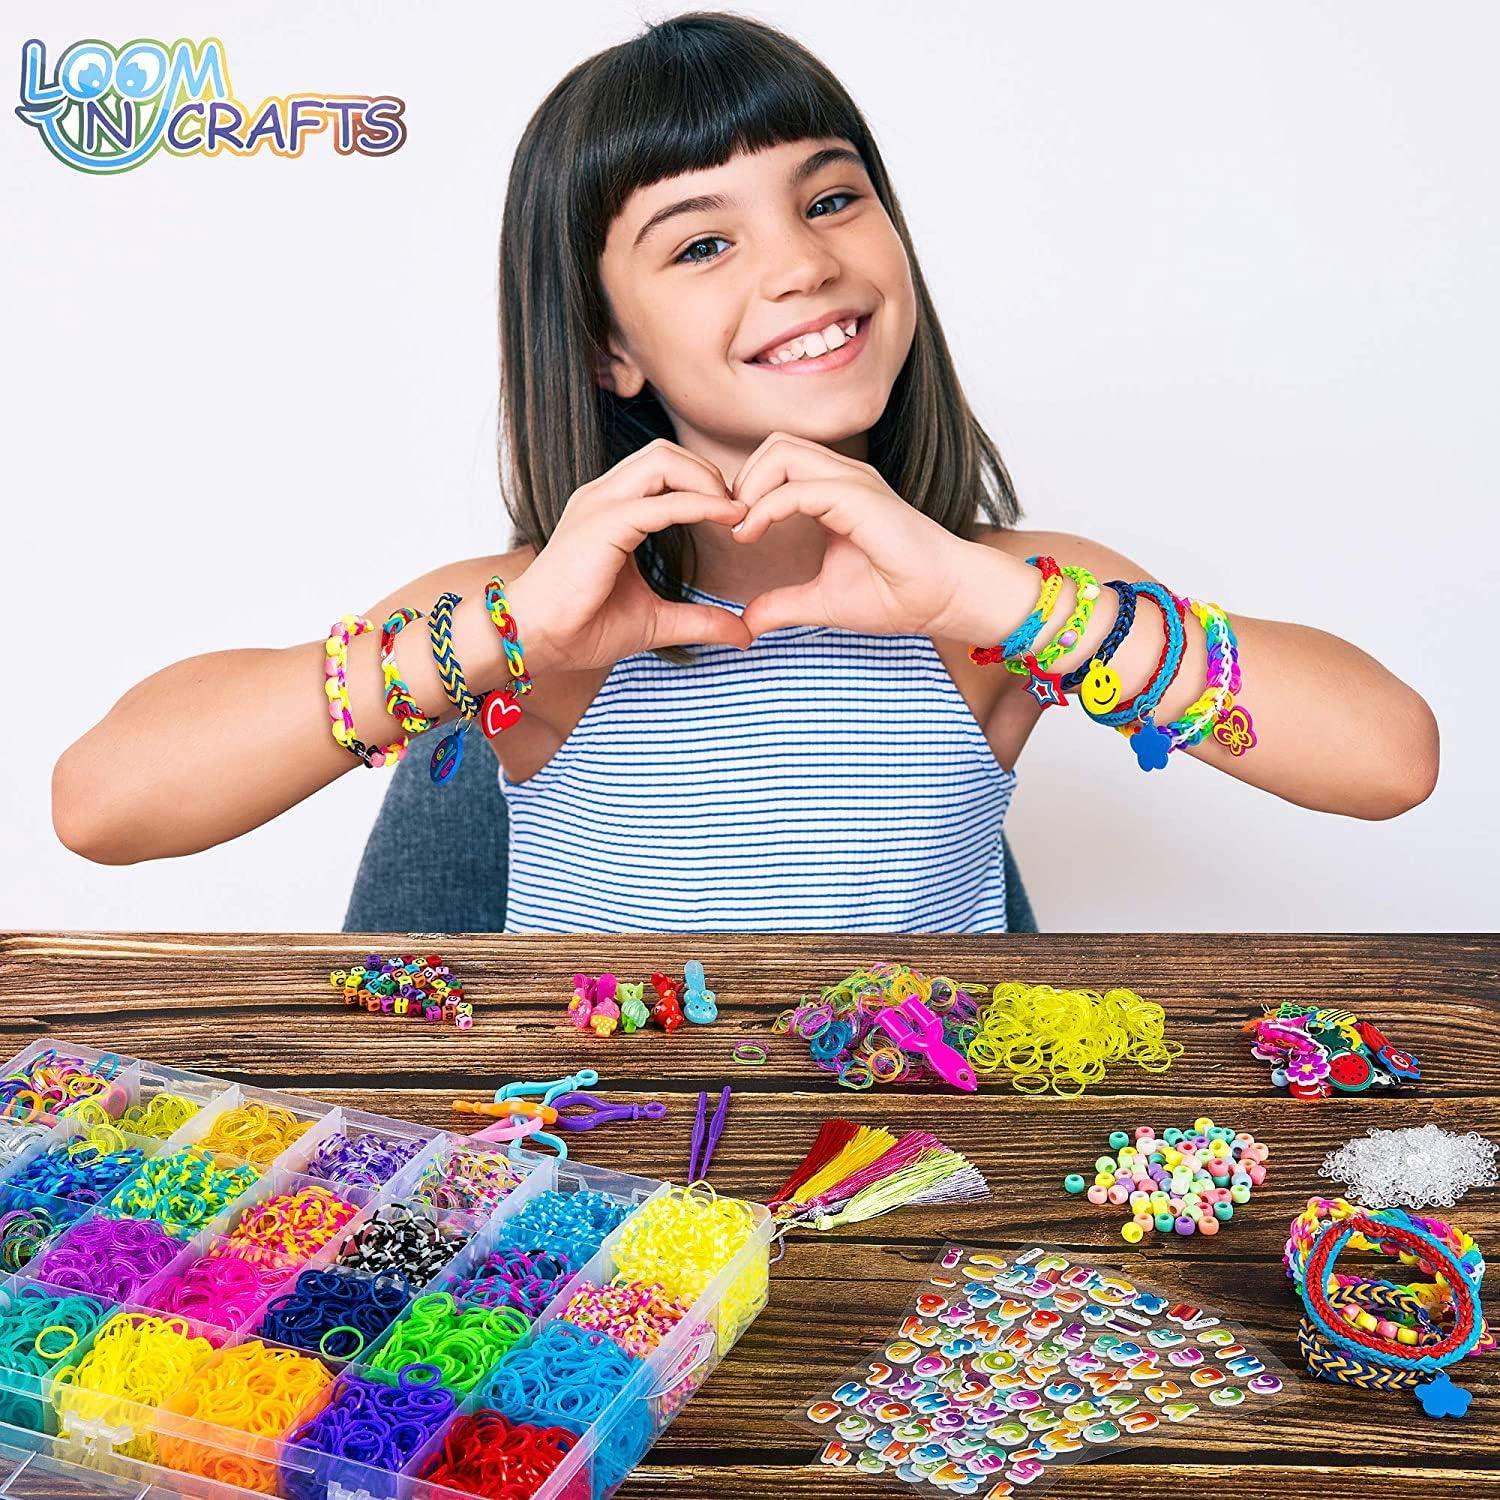 Great Choice Products Rubber Band Refill Kit Colors 2400Pc +100 S Clips Loom  Bracelet